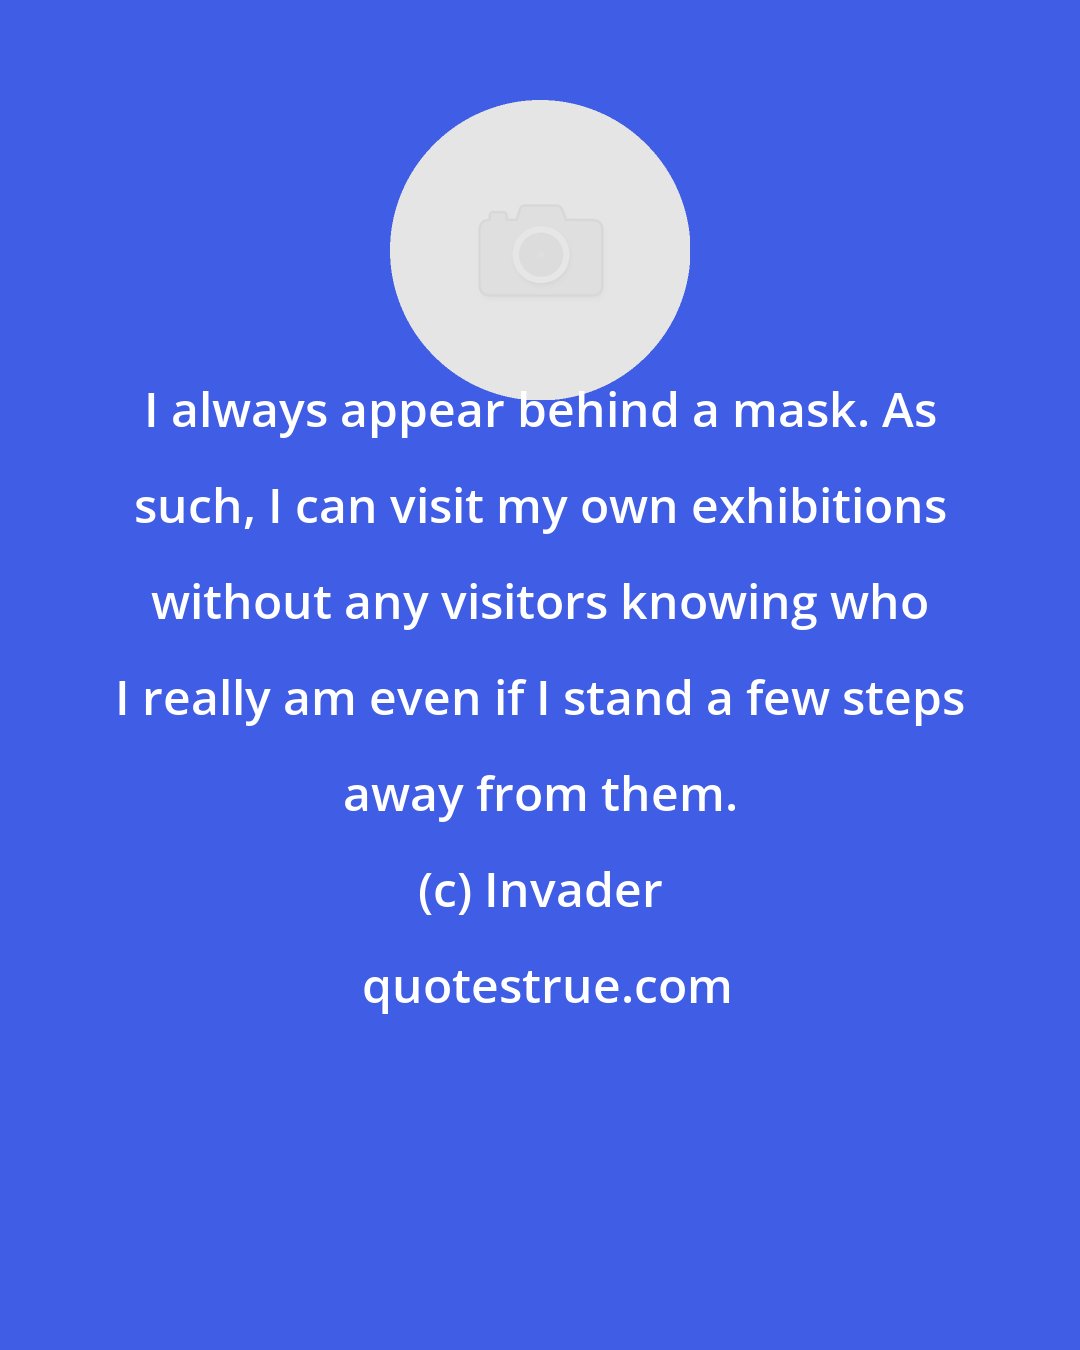 Invader: I always appear behind a mask. As such, I can visit my own exhibitions without any visitors knowing who I really am even if I stand a few steps away from them.